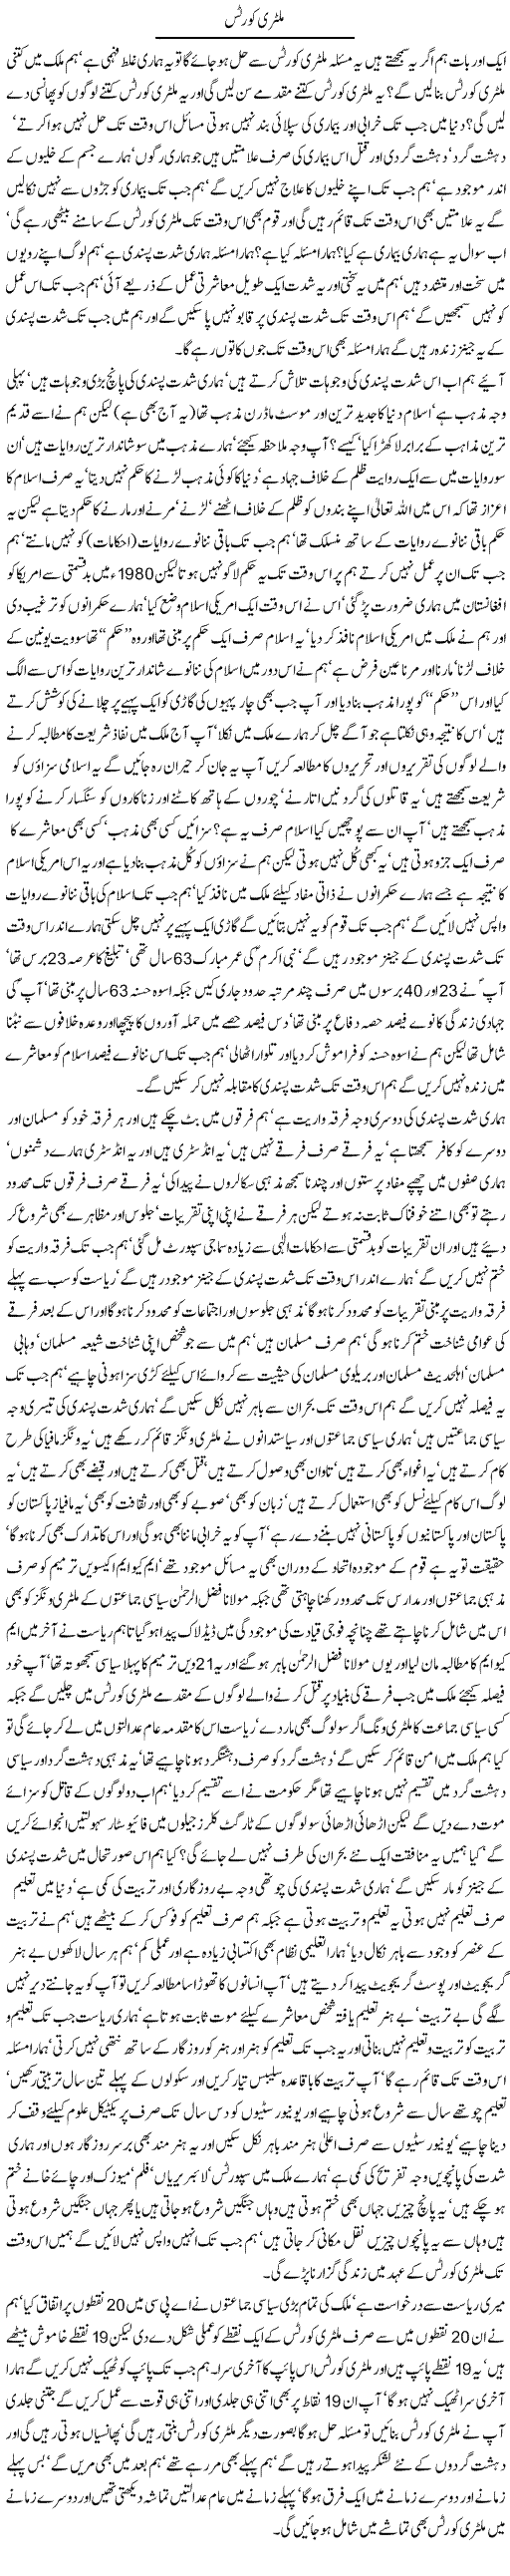 Military Courts by Javed Chaudhry